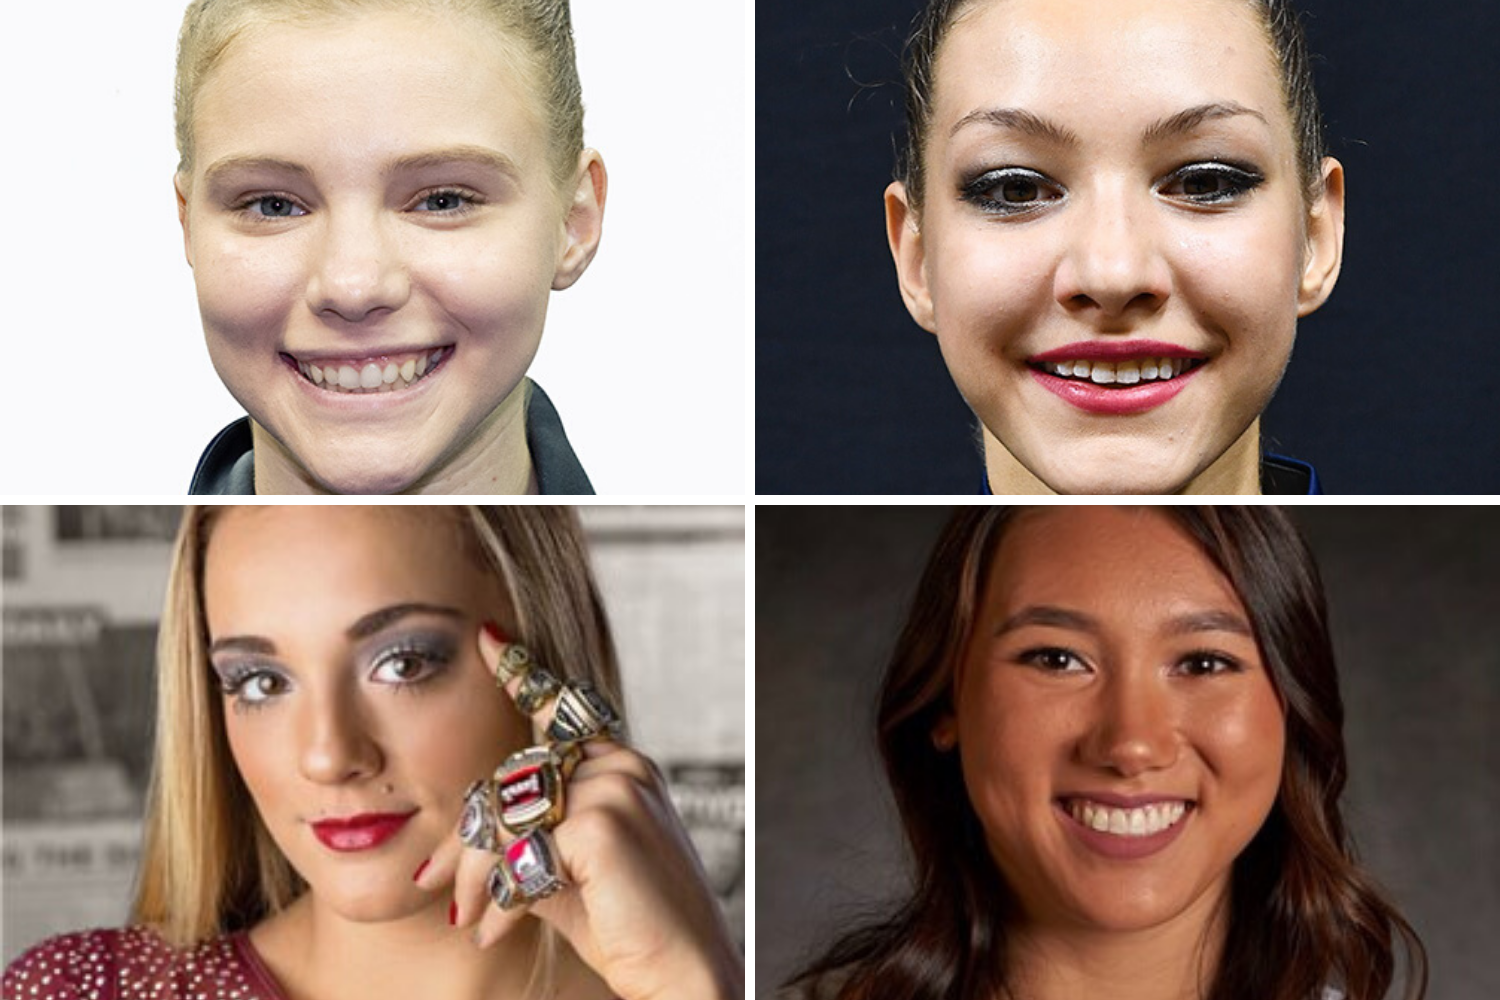 Four gymnasts announced as semifinalists for AAU Sullivan Award